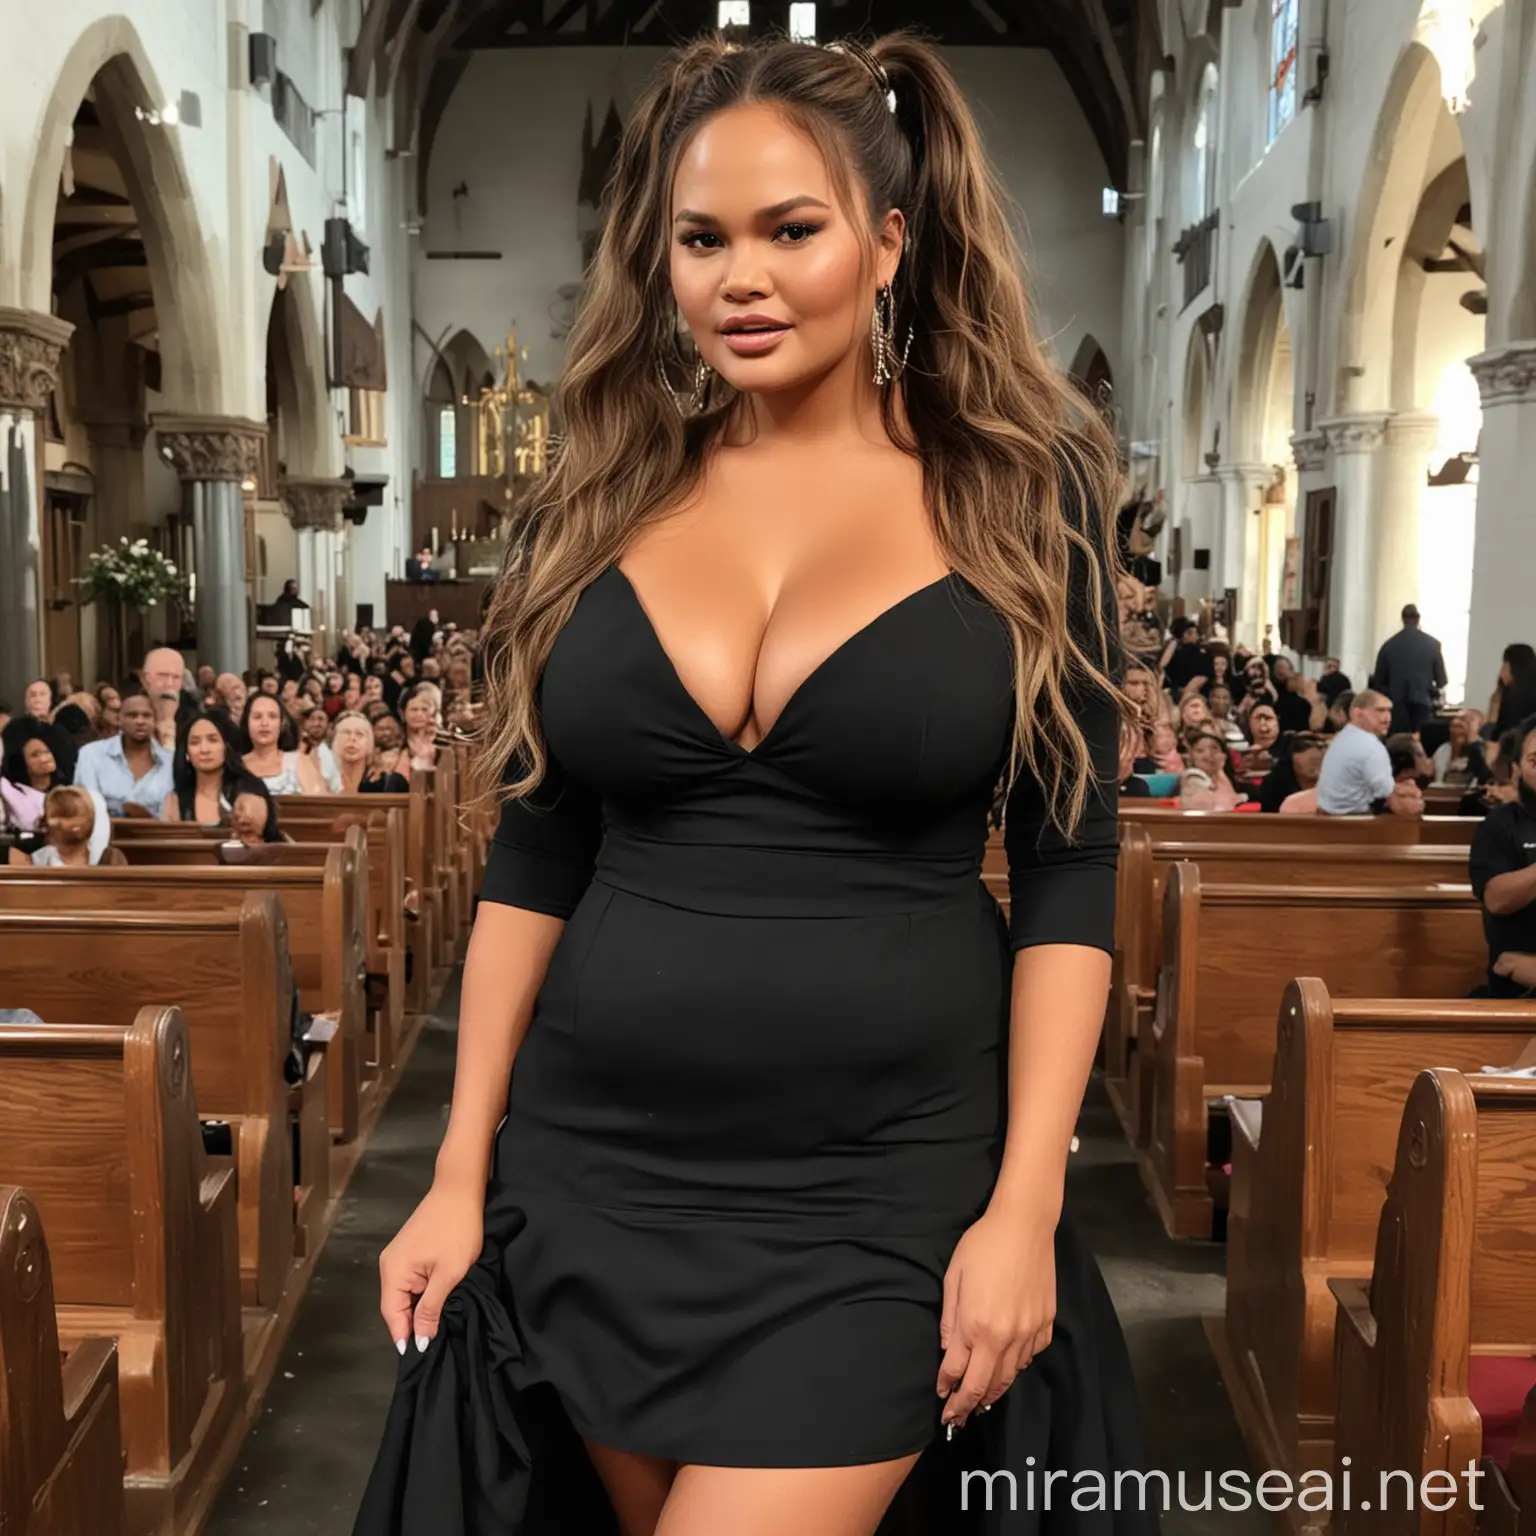 Chrissy Teigen in a black dress in church, bbw, giant breasts, showing massive cleavage, big long kinky hair in a ponytail